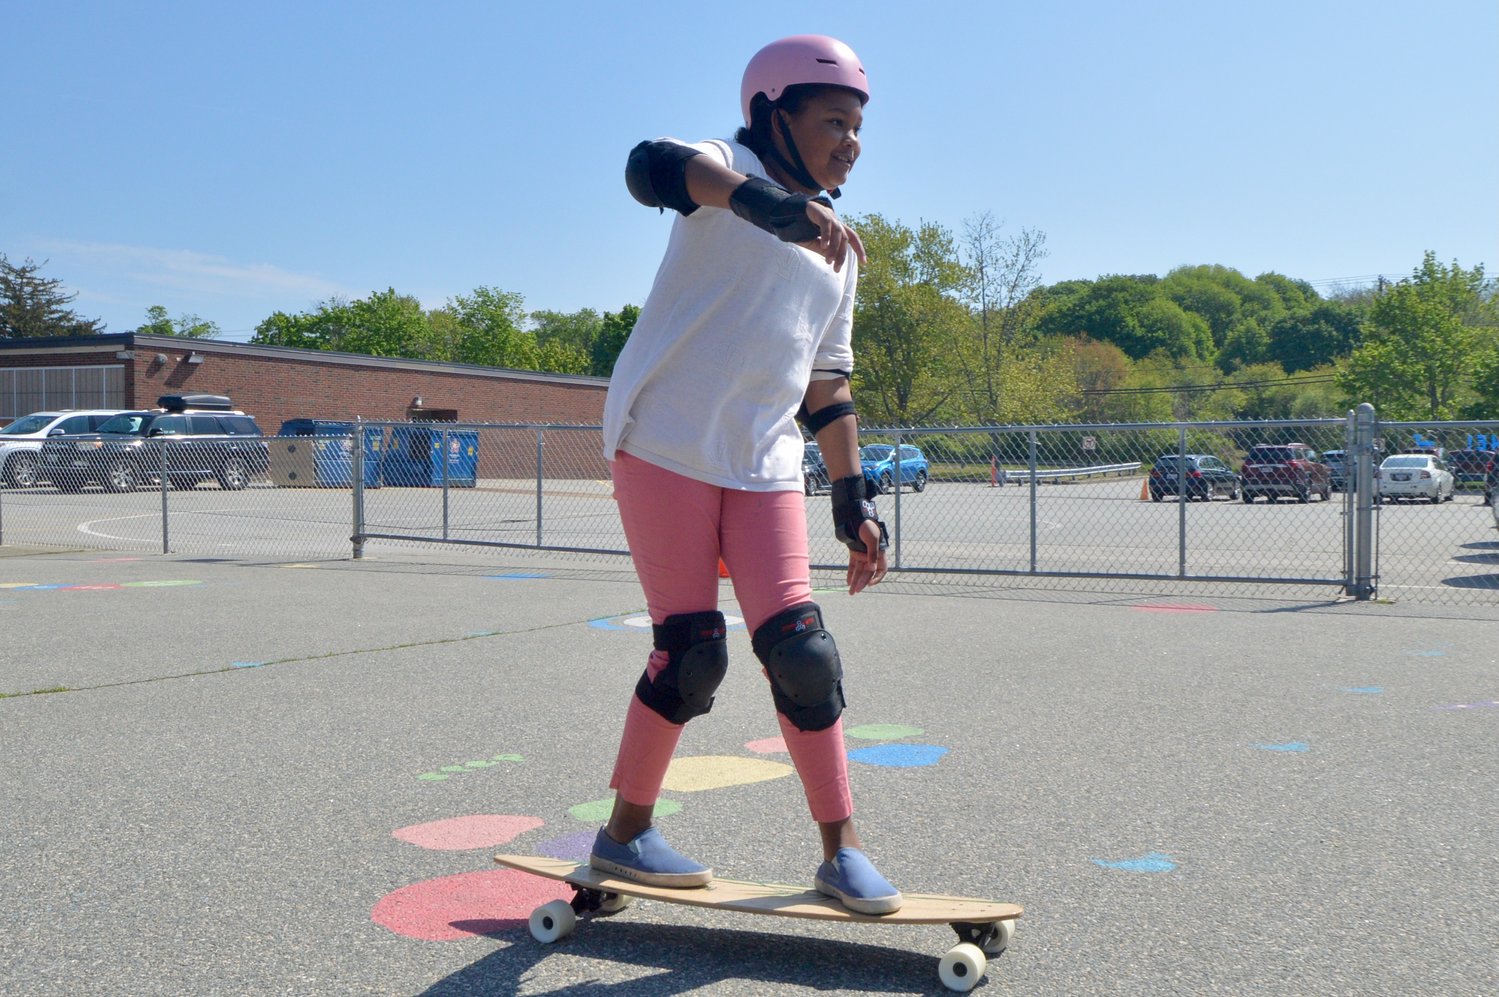 Ellie coasts on the longboard during P.E. class in the Melville School parking lot on Monday.